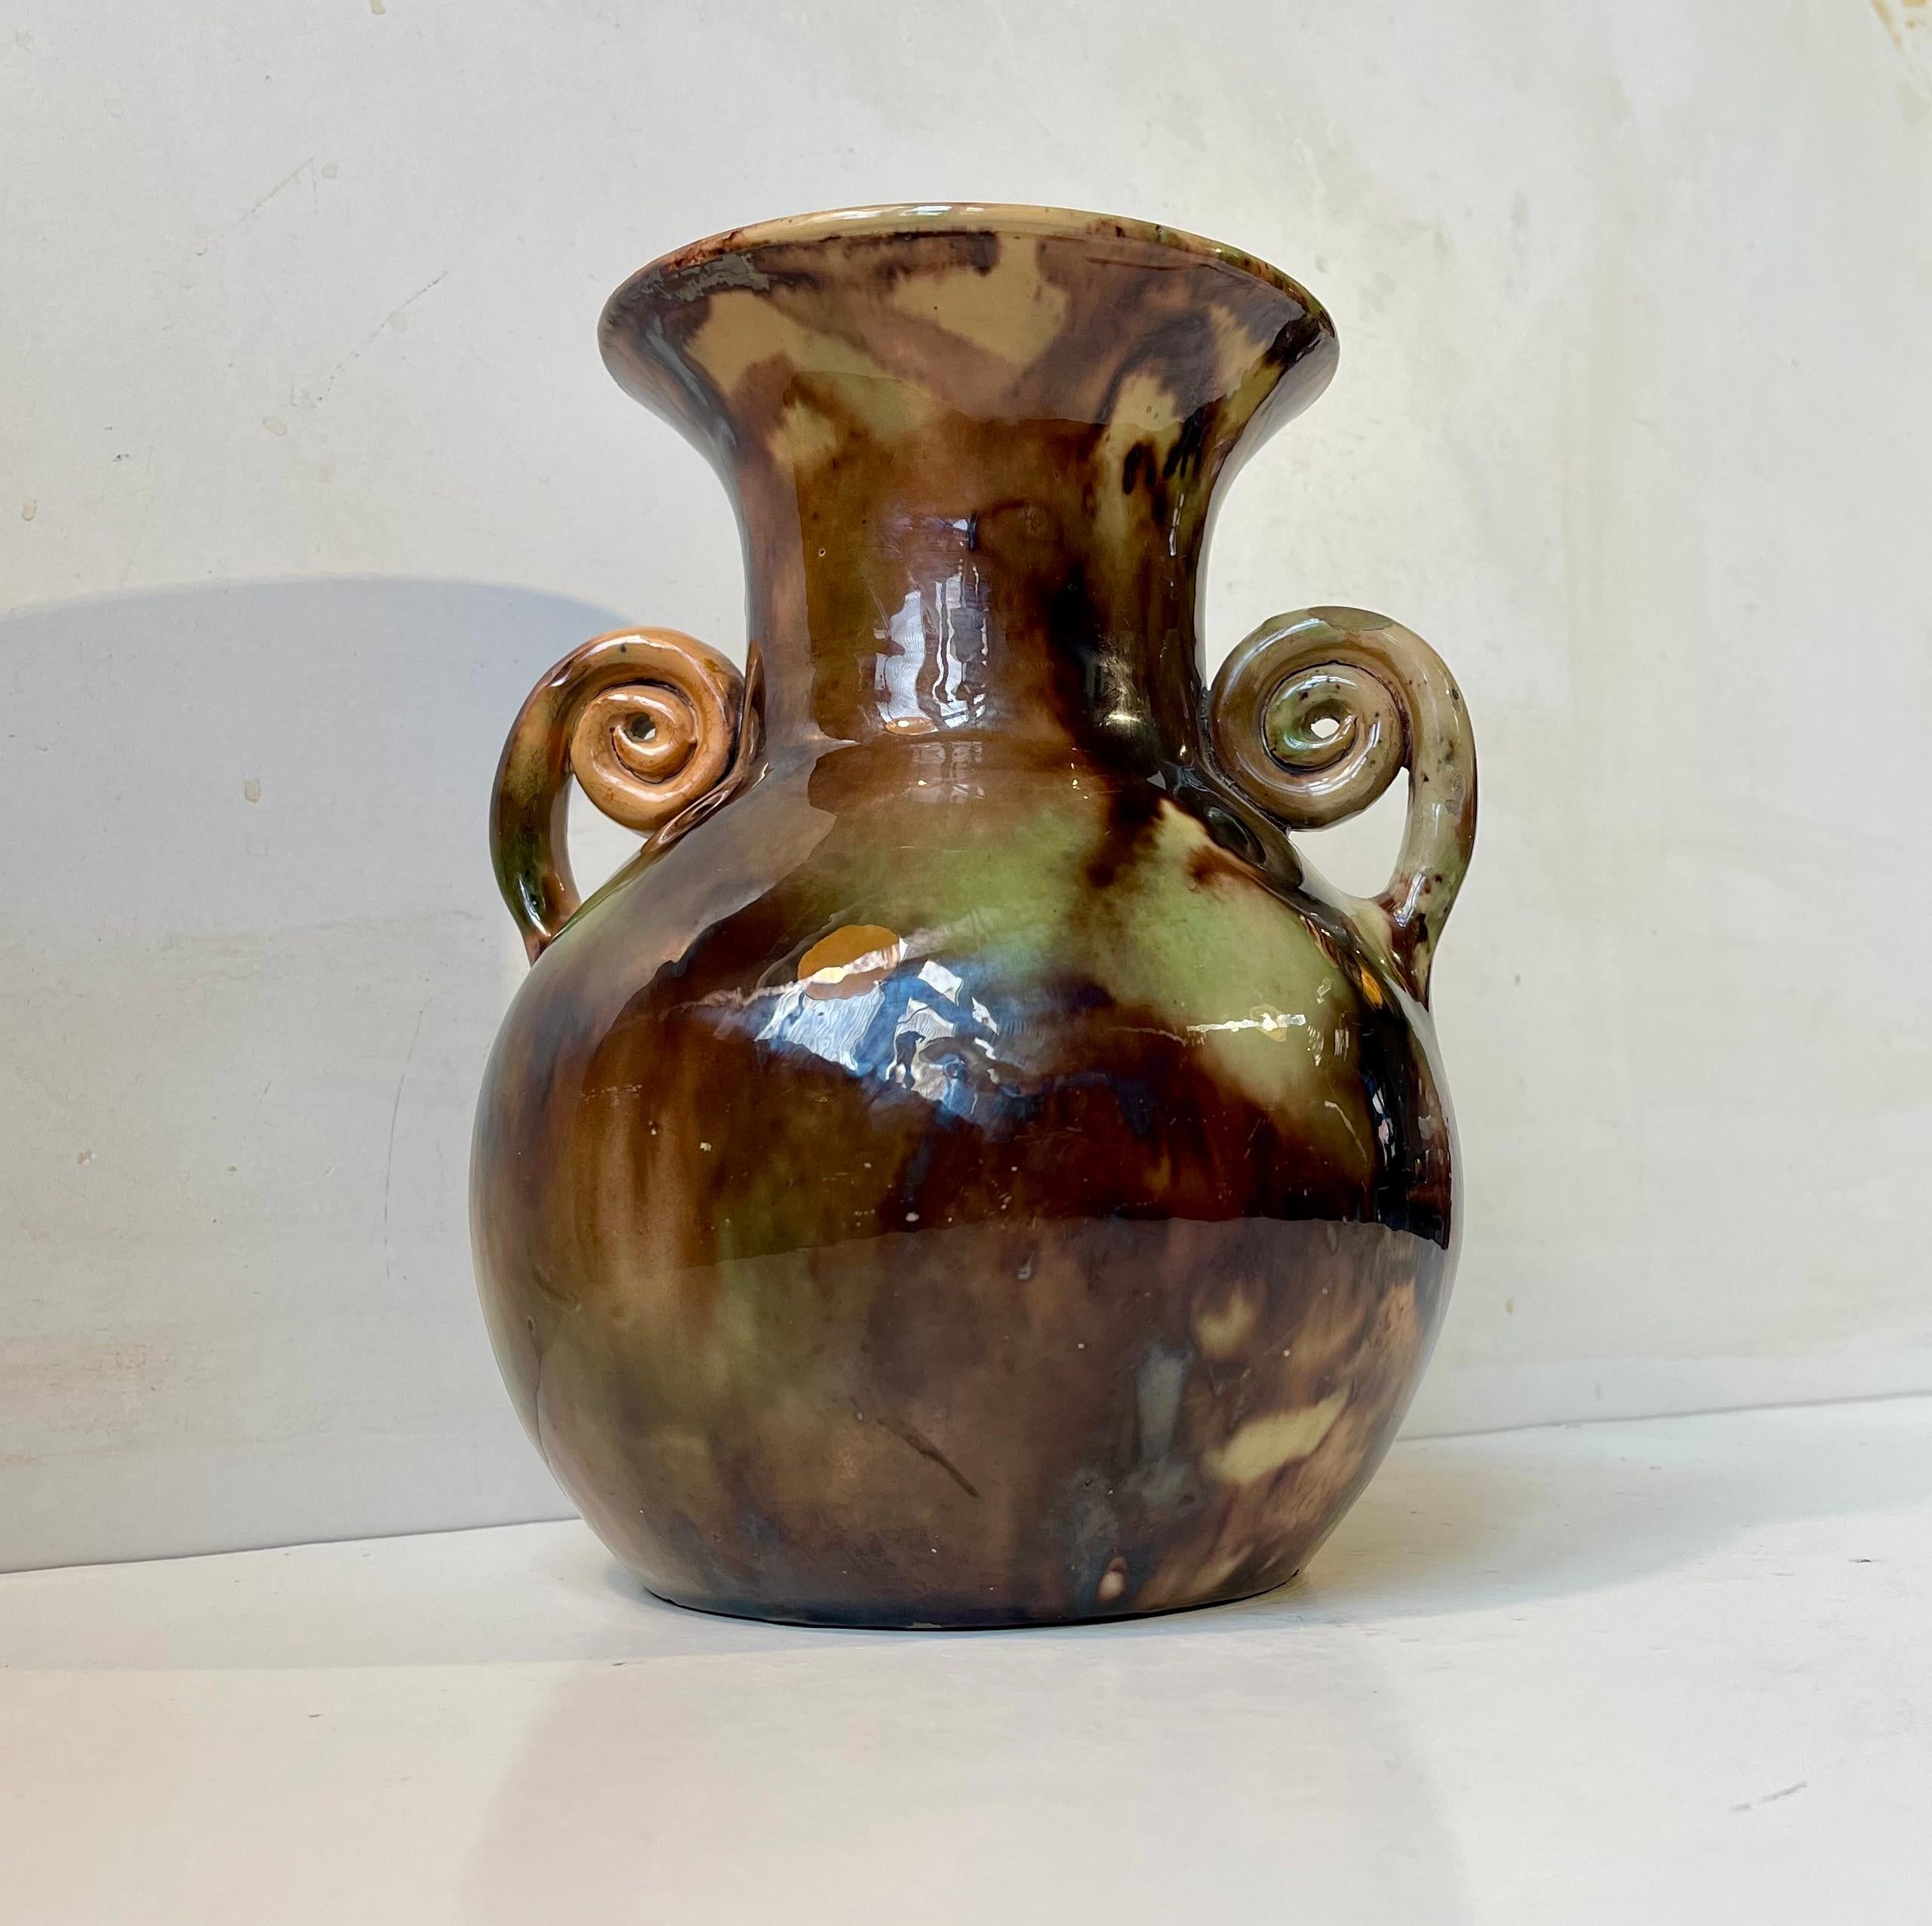 Art Deco ceramic vase with Majolica camouflage glaze and swirling handles. Designed and made around 1920 by Michael Andersen & Son on the island of Bornholm in Denmark. Measurements: H: 23 cm, Diameter: 13 cm (top/neck).